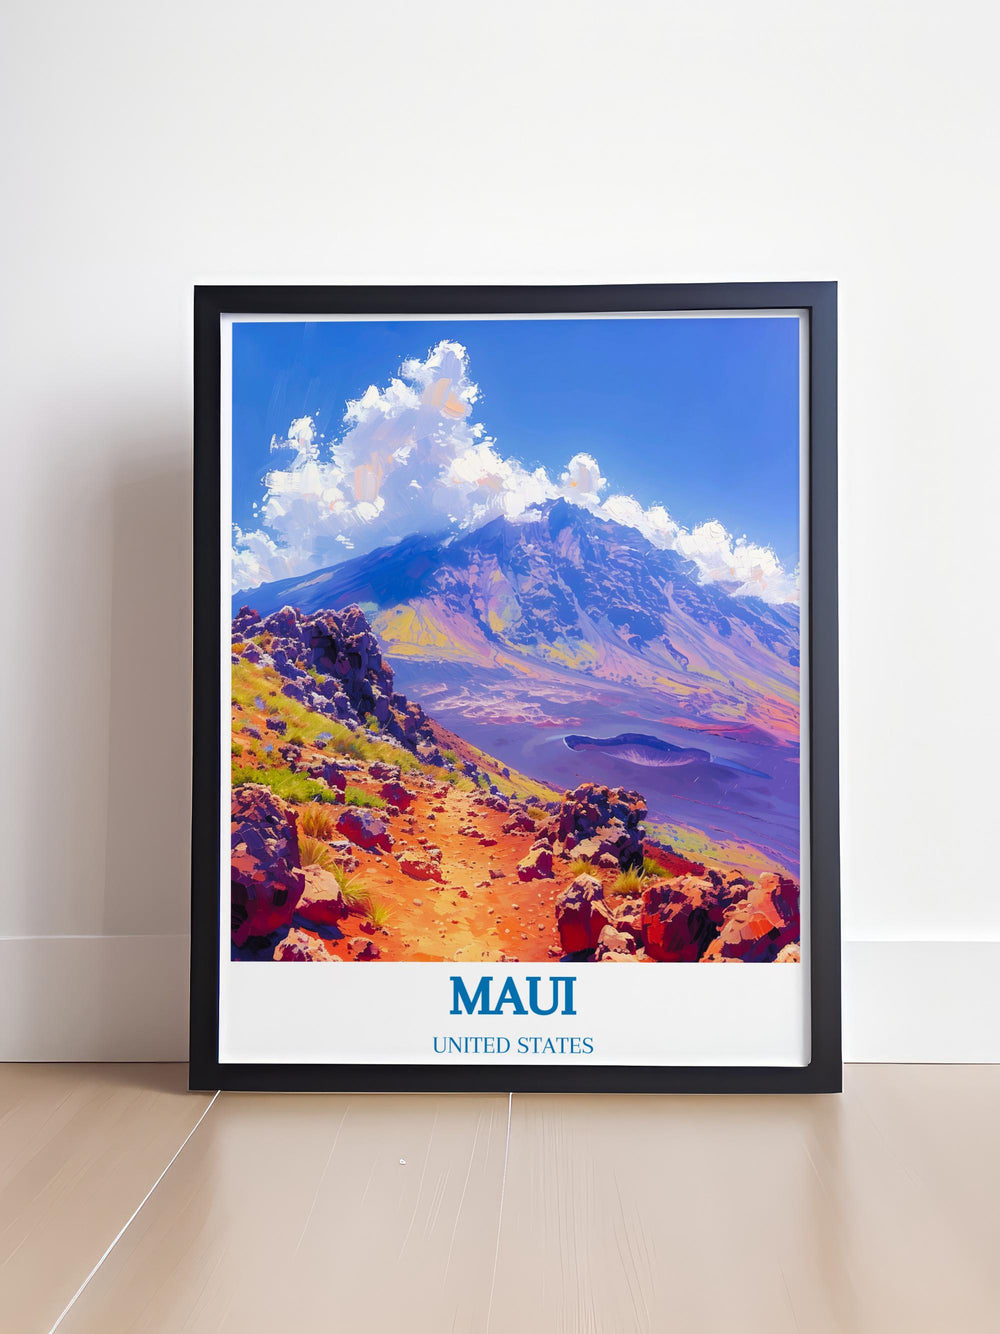 Modern wall decor of Maui showcasing abstract interpretations of the islands lush landscapes and coastal lines.